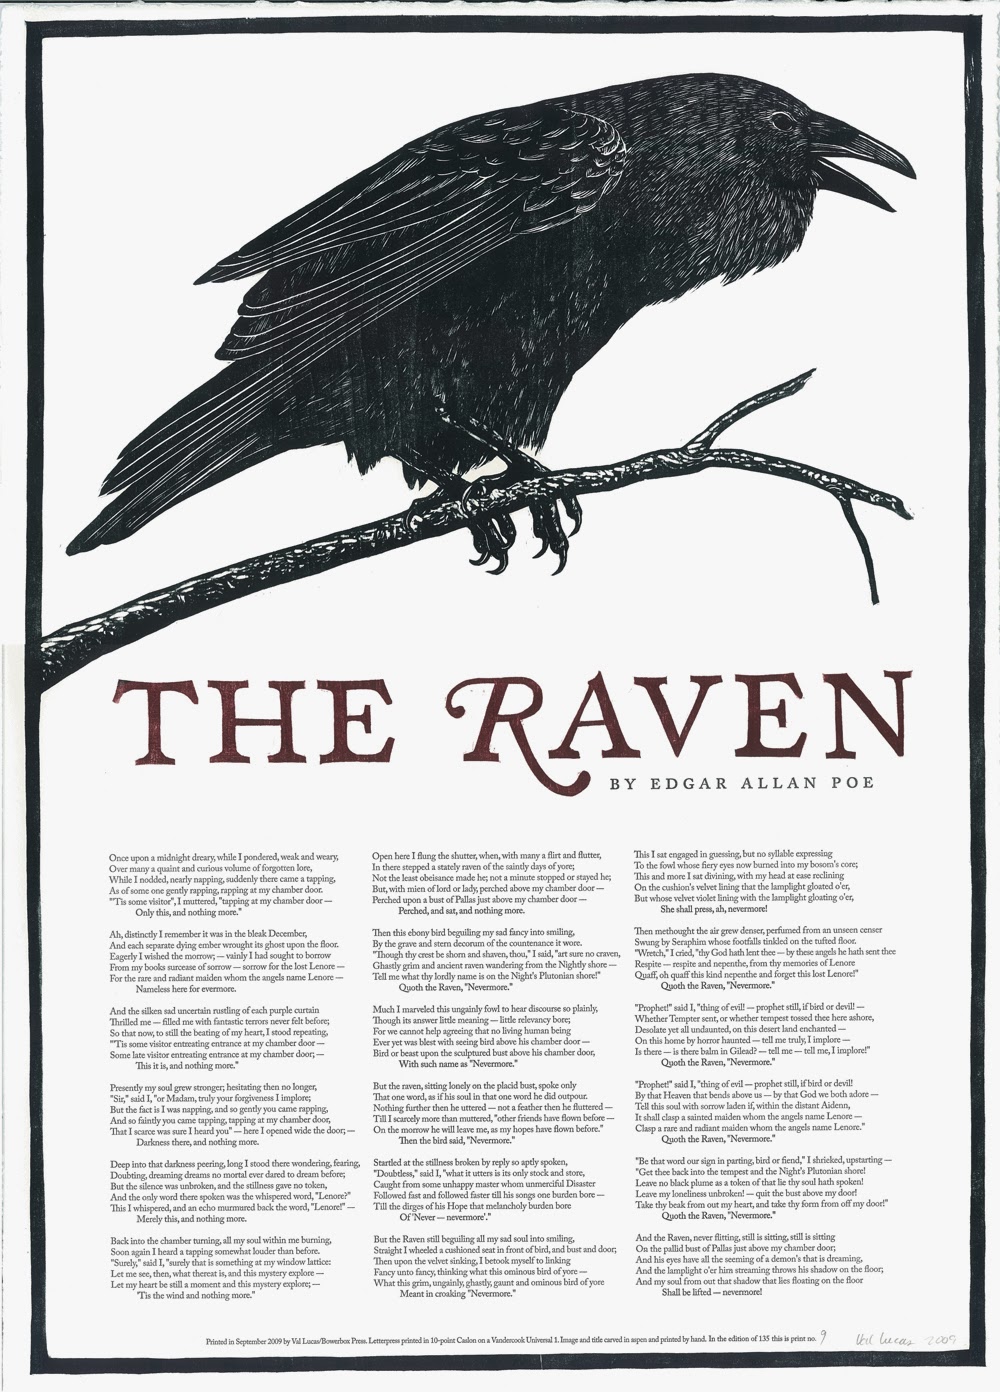 Free Literary Books for the Kindle (US & UK) The Raven by Edgar